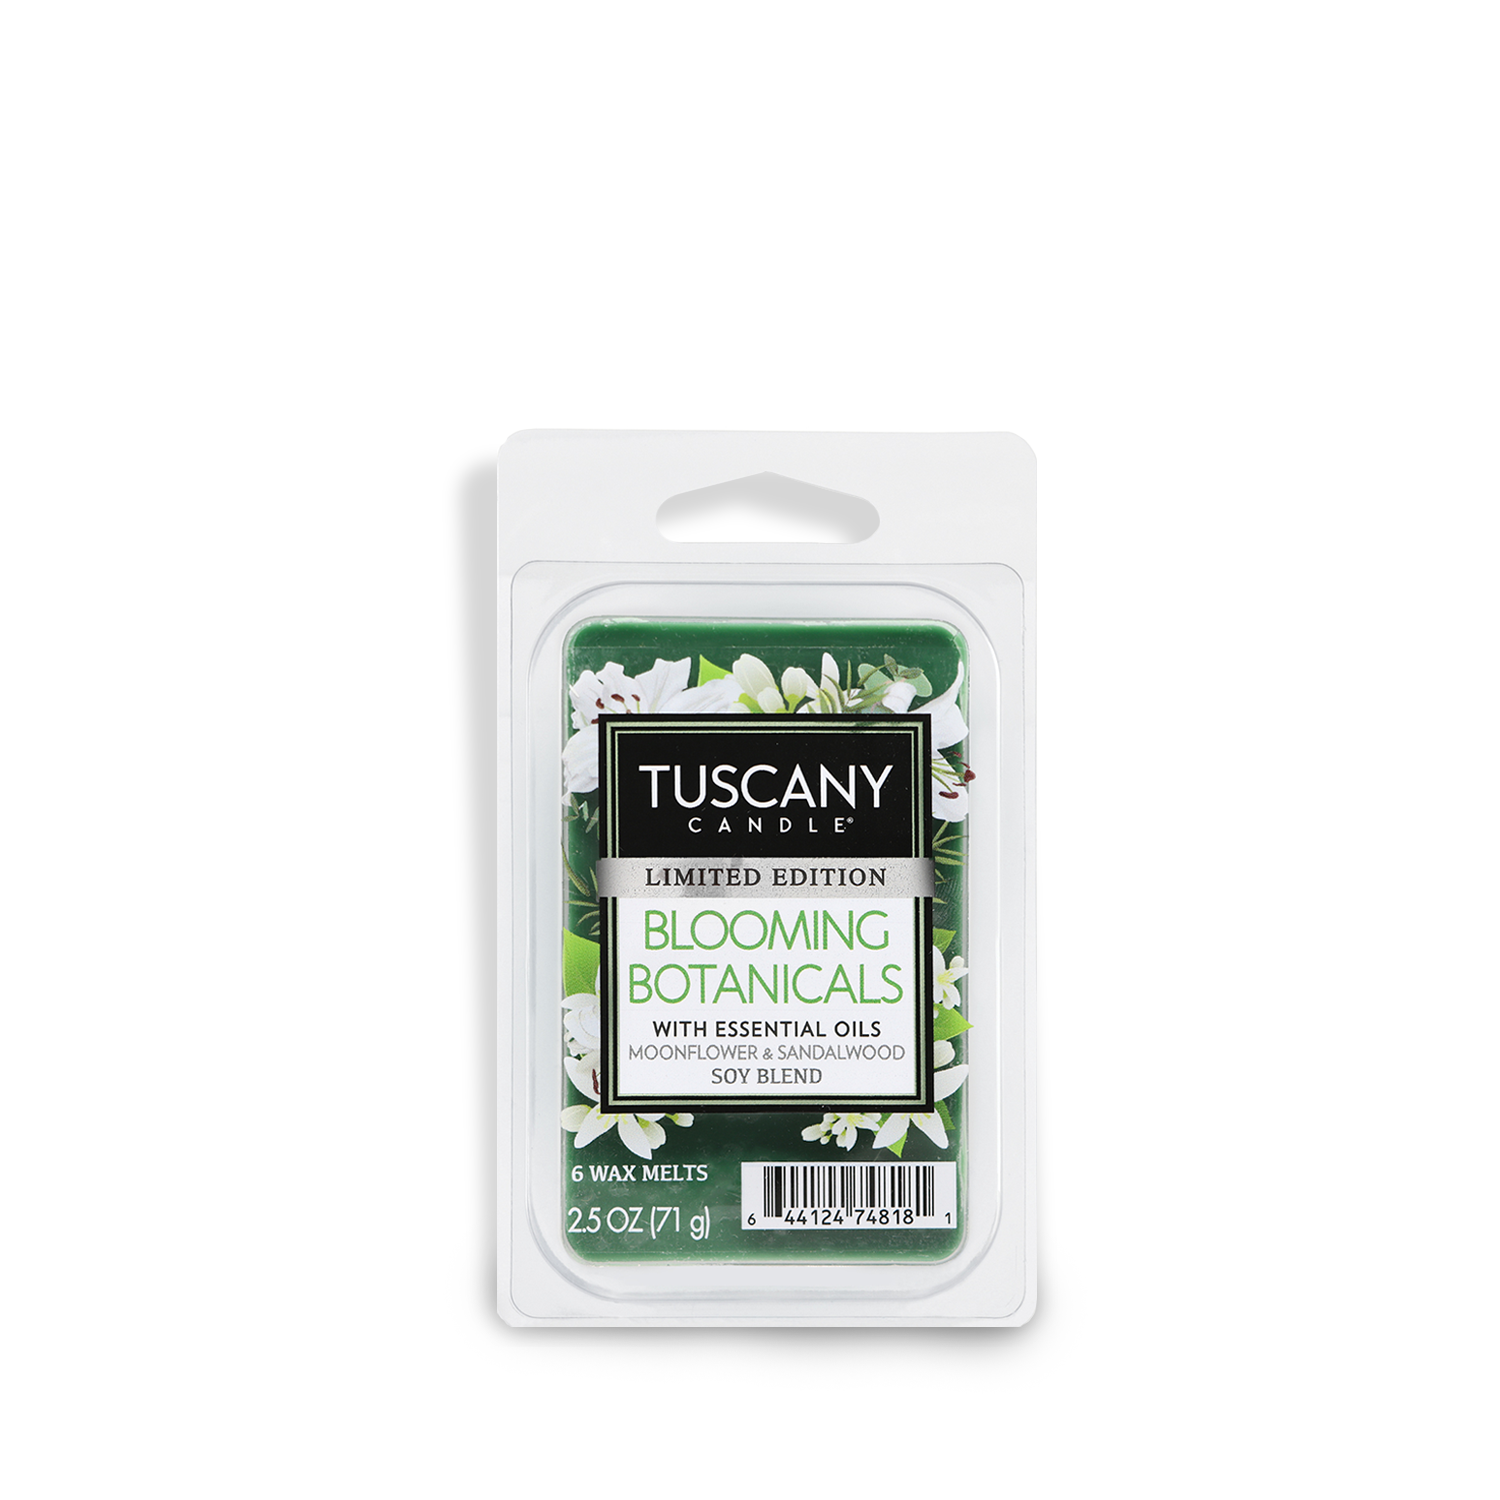 A package of Tuscany Candle® SEASONAL limited edition Blooming Botanicals scented wax melts, featuring the enticing aromas of tuberose and neroli flower.